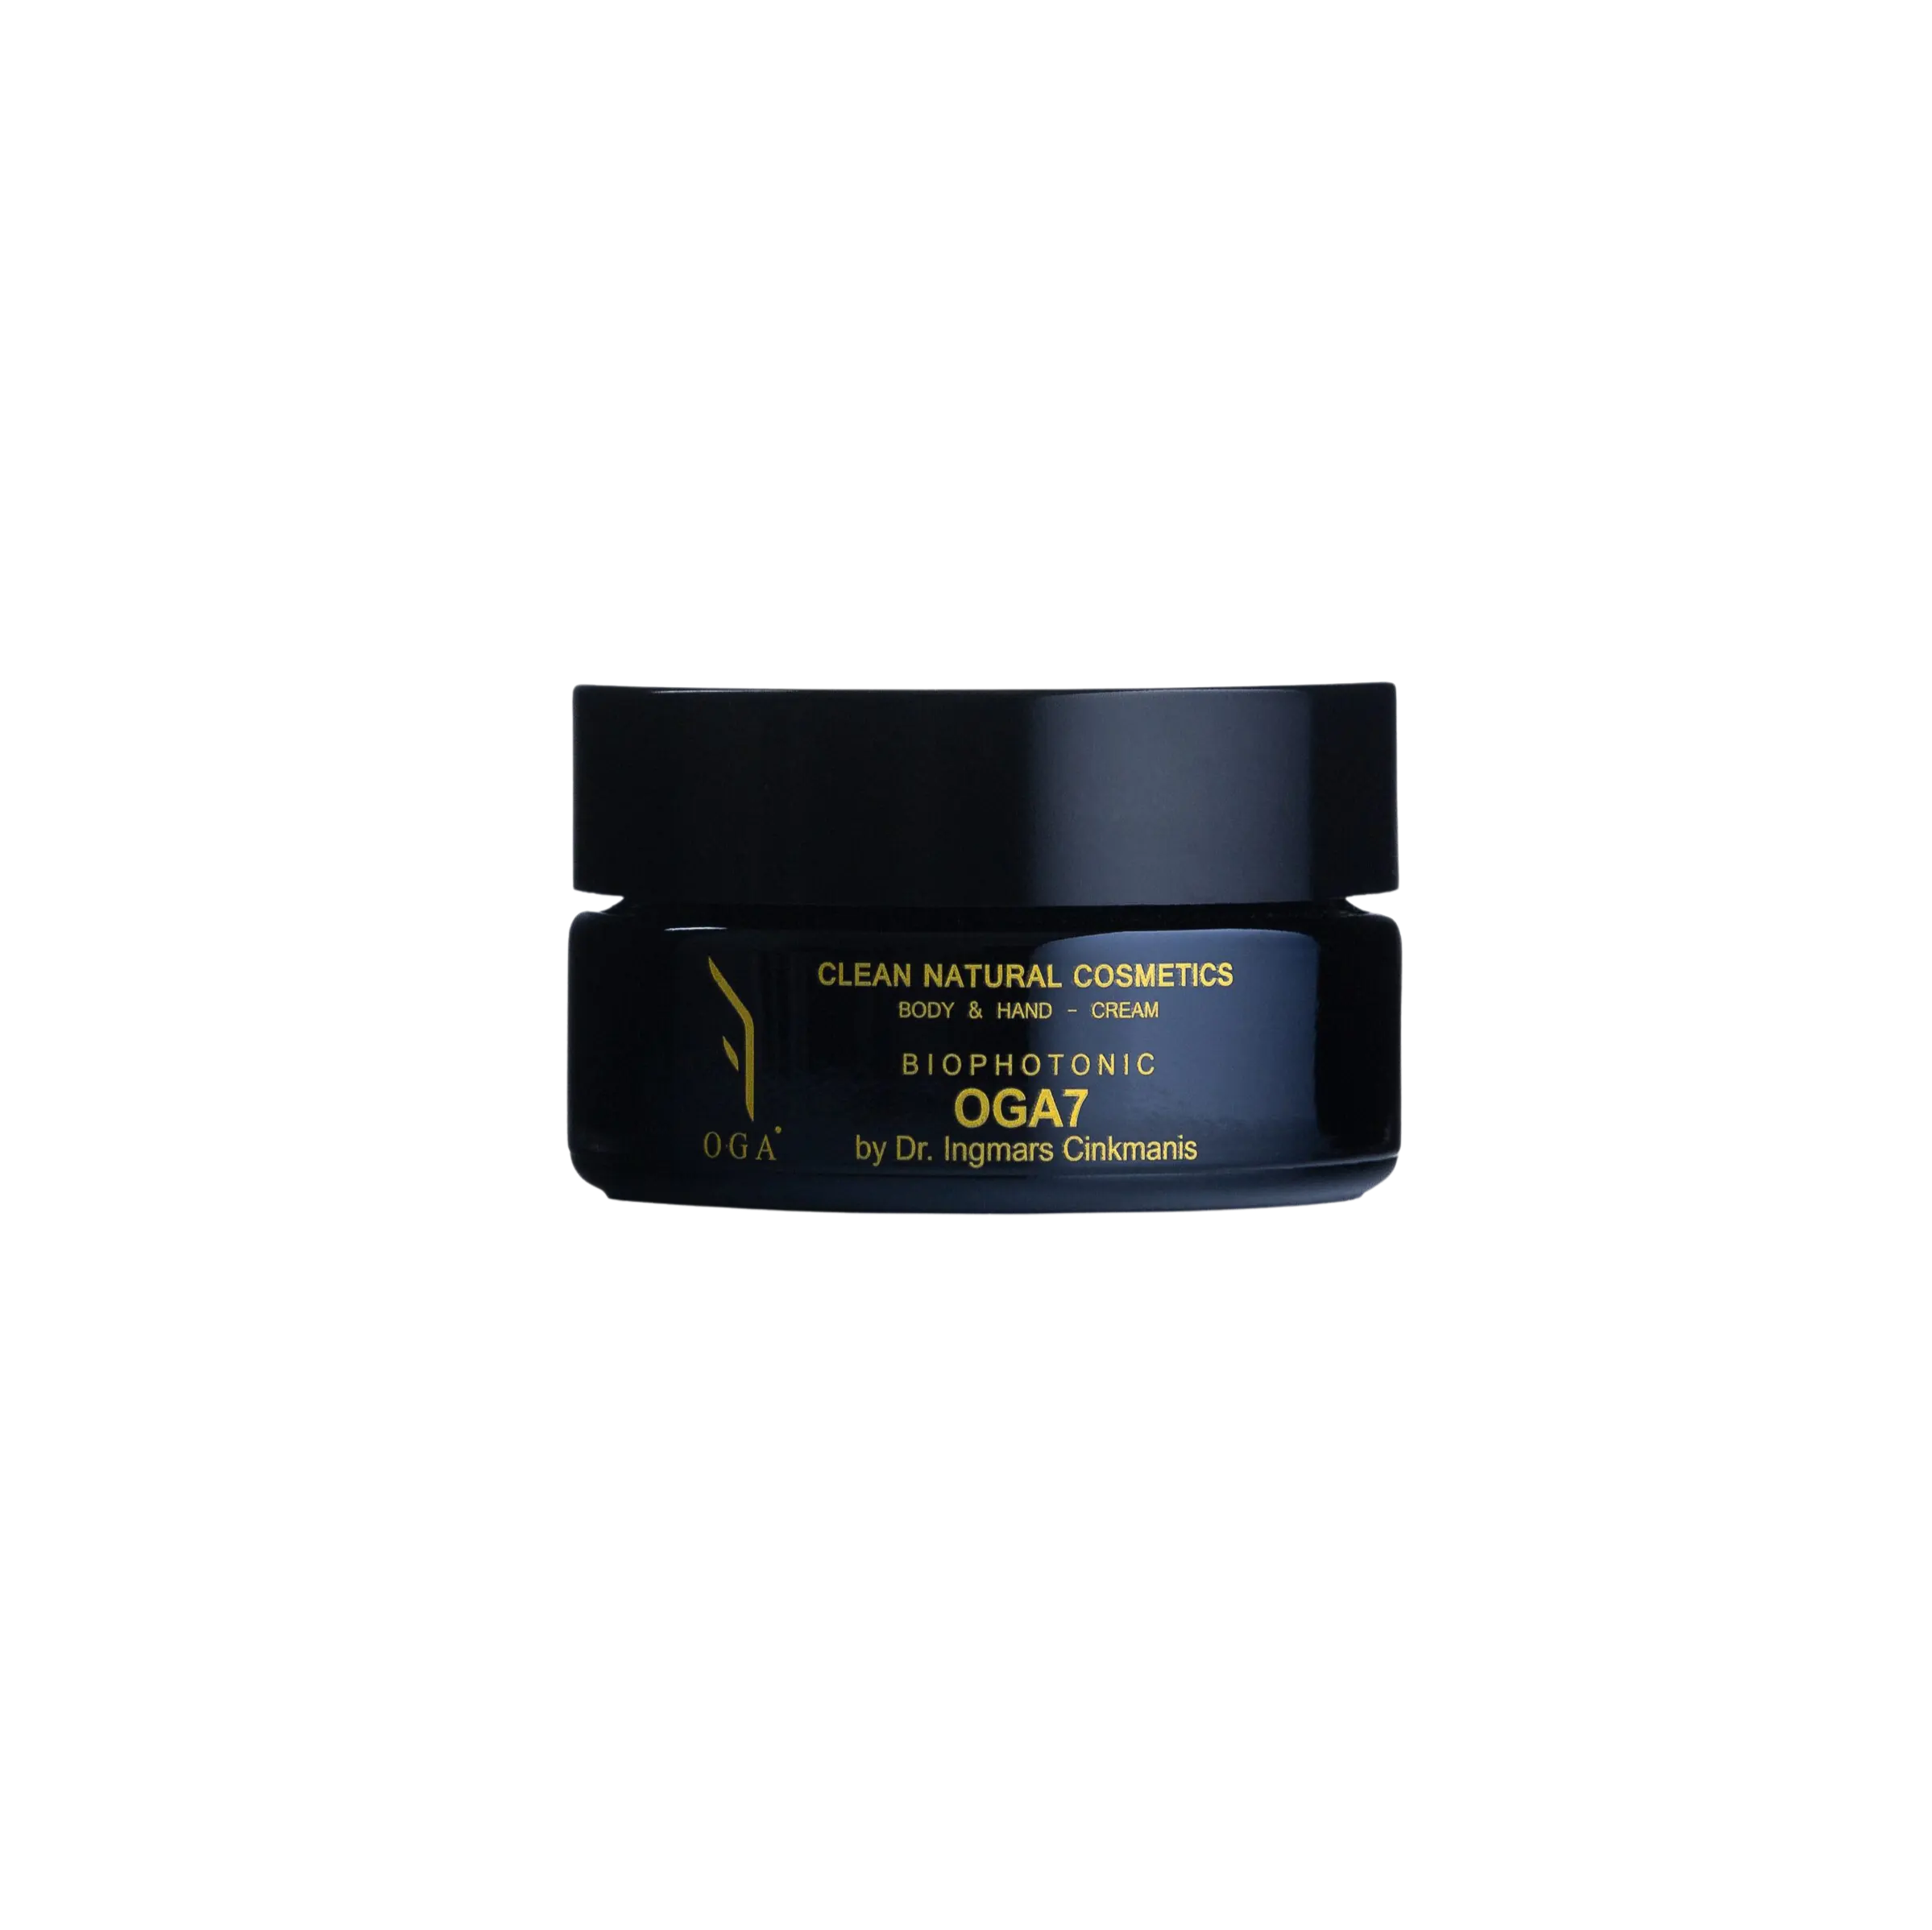 Nourishing body and hand cream for normal and dry skin, reducing roughness and restoring a healthy appearance with a pleasant scent